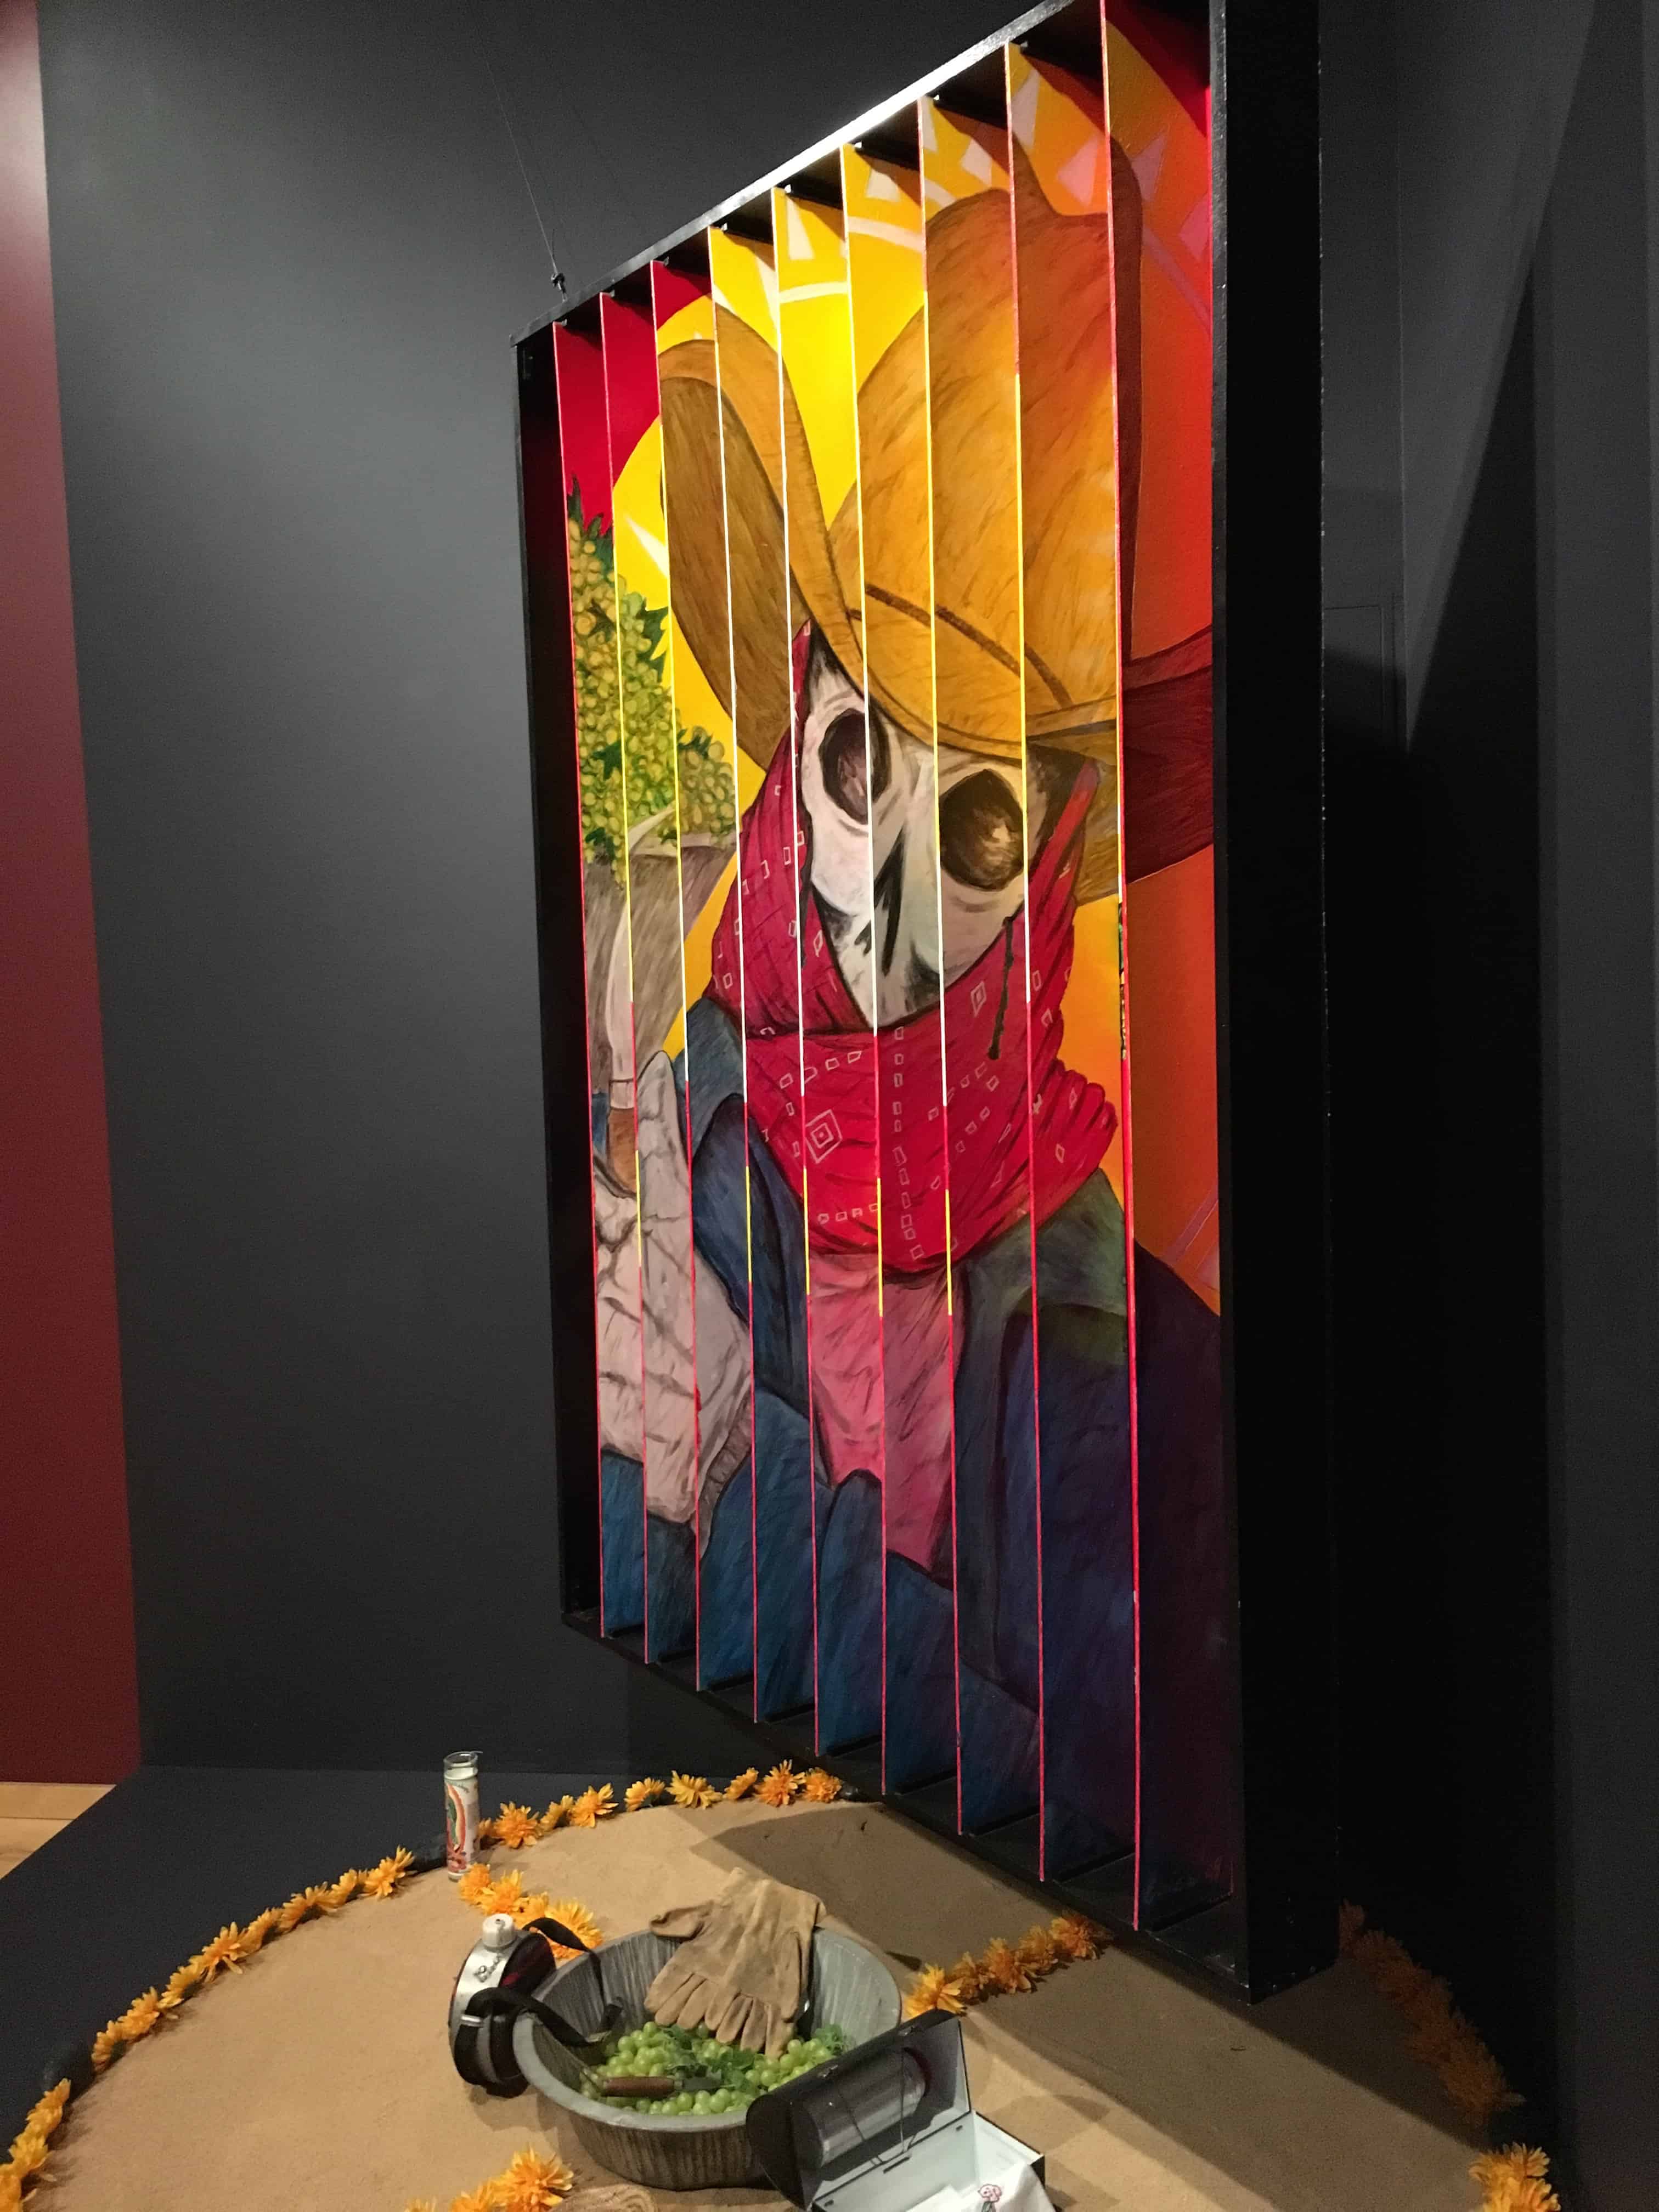 Sun-Mad by Ester Hernández at National Museum of Mexican Art in Pilsen, Chicago, Illinois